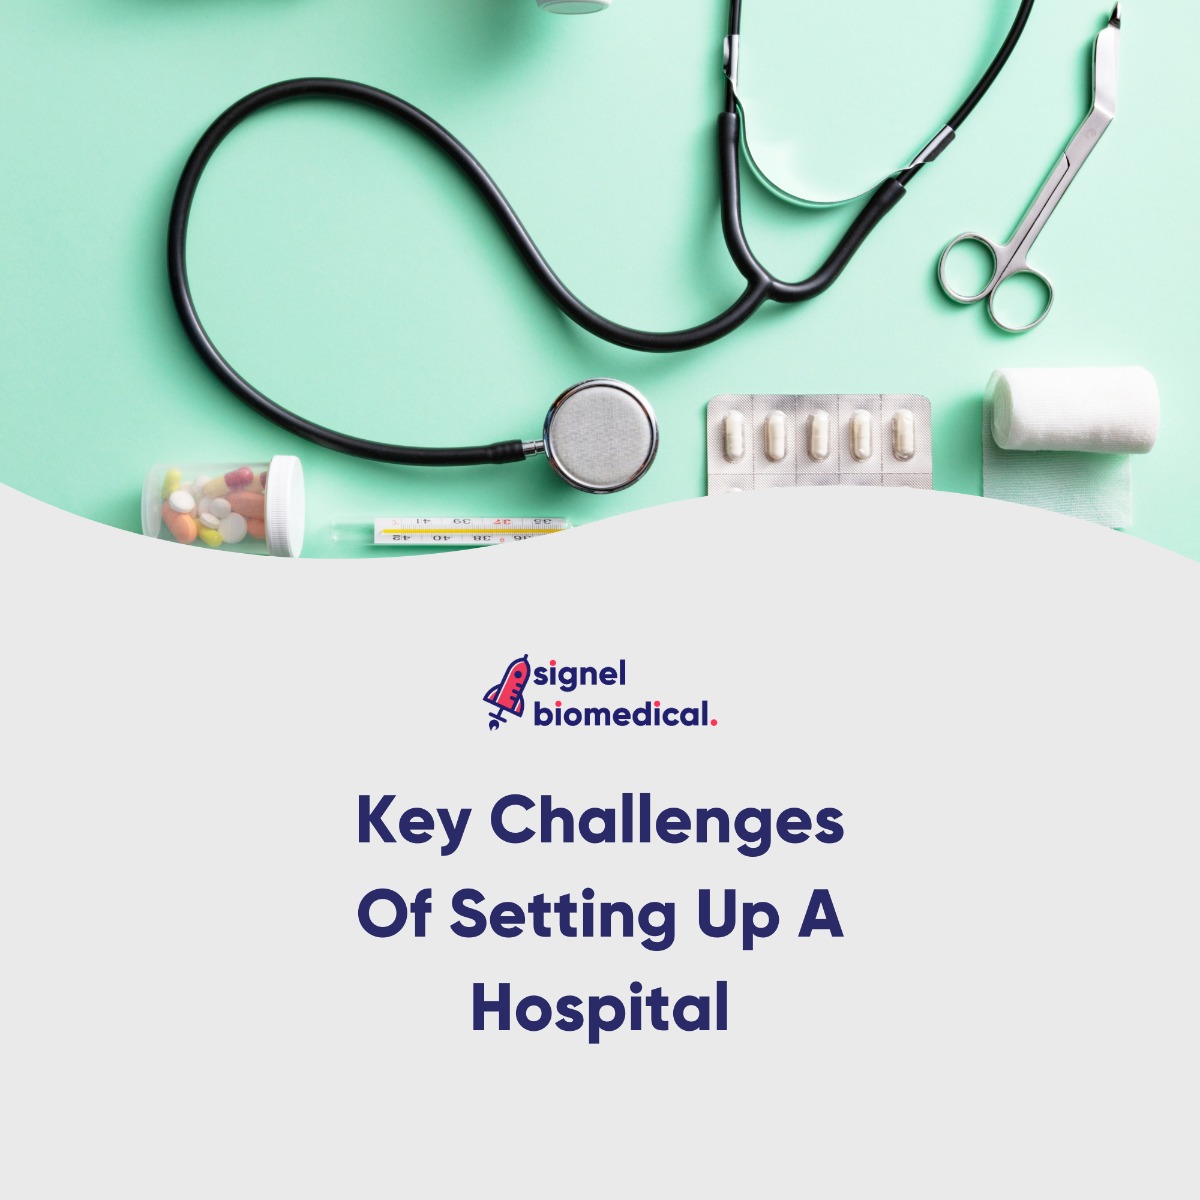 Key Challenges Of Setting Up A Hospital